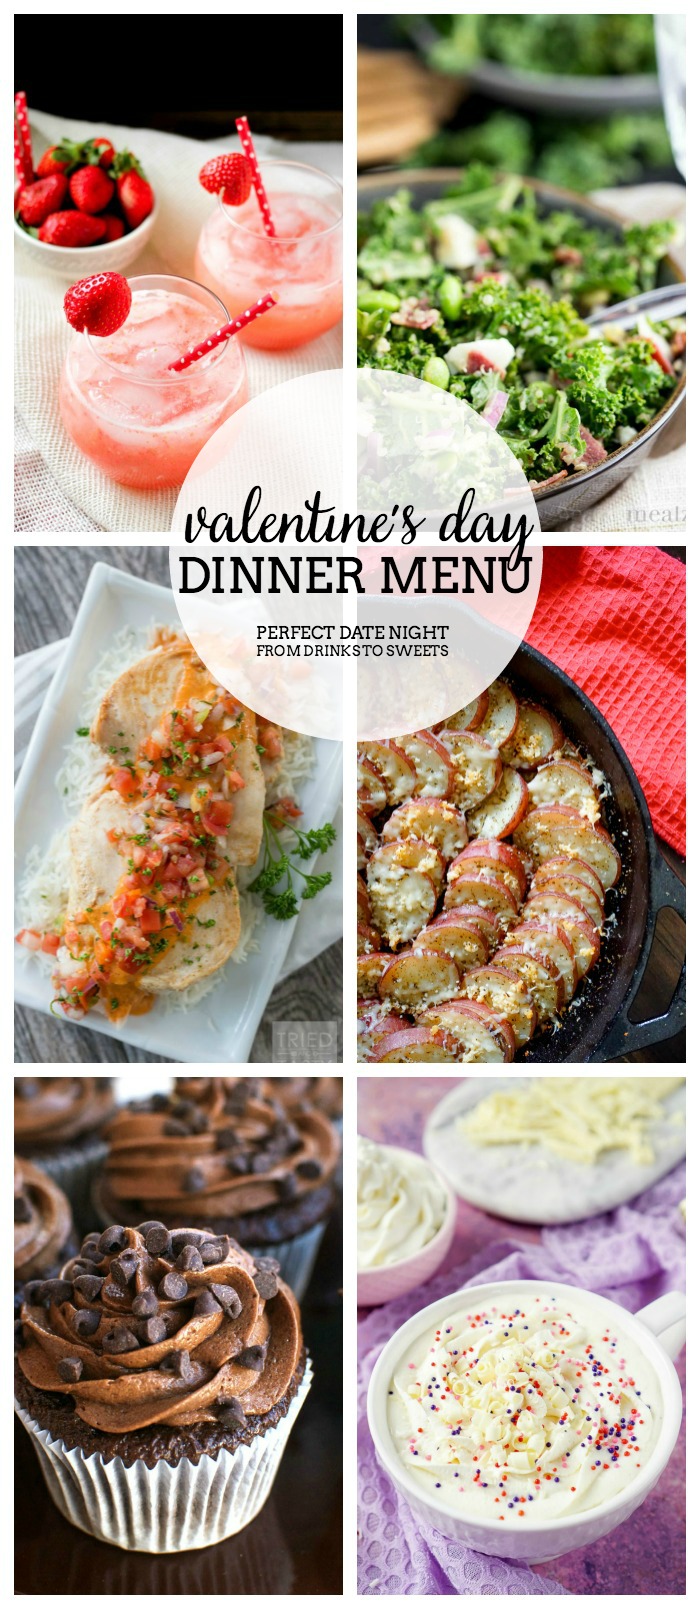 Valentine's Day Dinner Menu - We have put together the perfect date night dinner at home, from cocktails and salad to main course and dessert! 